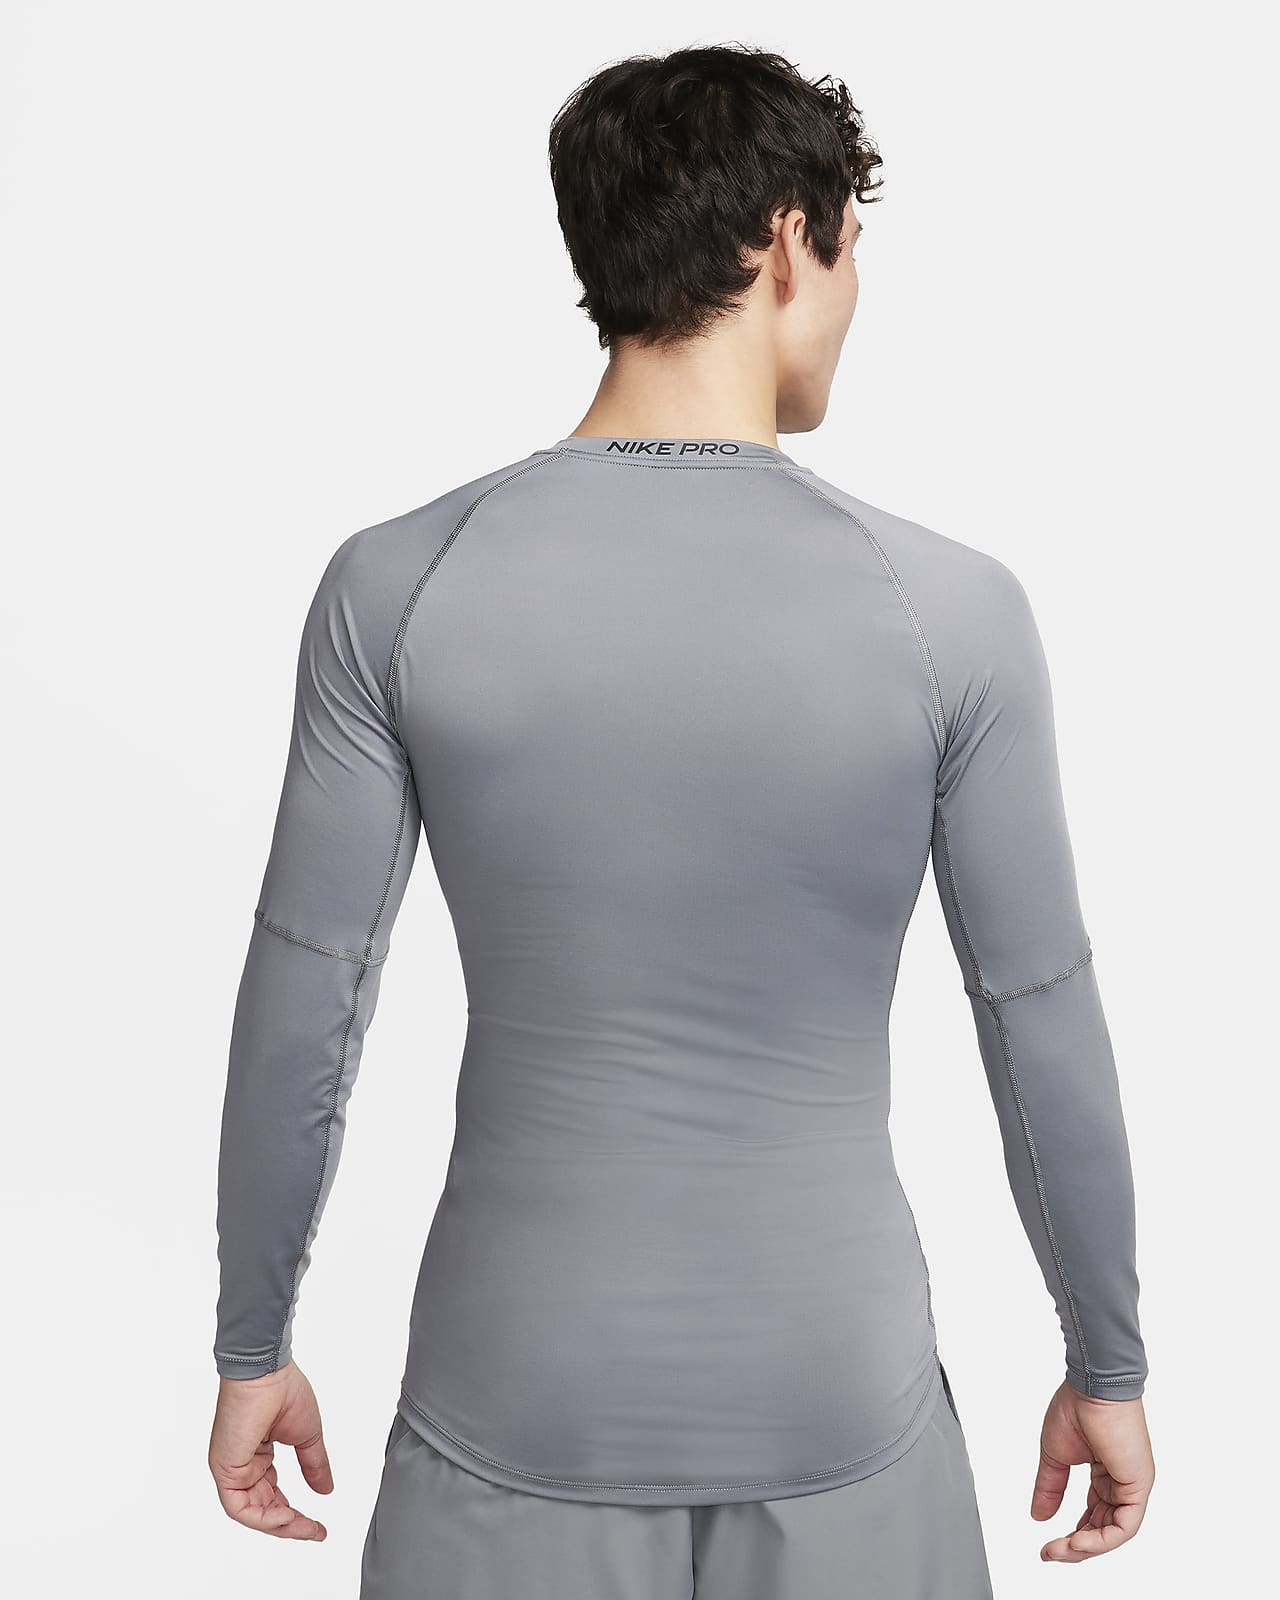 Nike Pro Training Compression Top, 838091-100